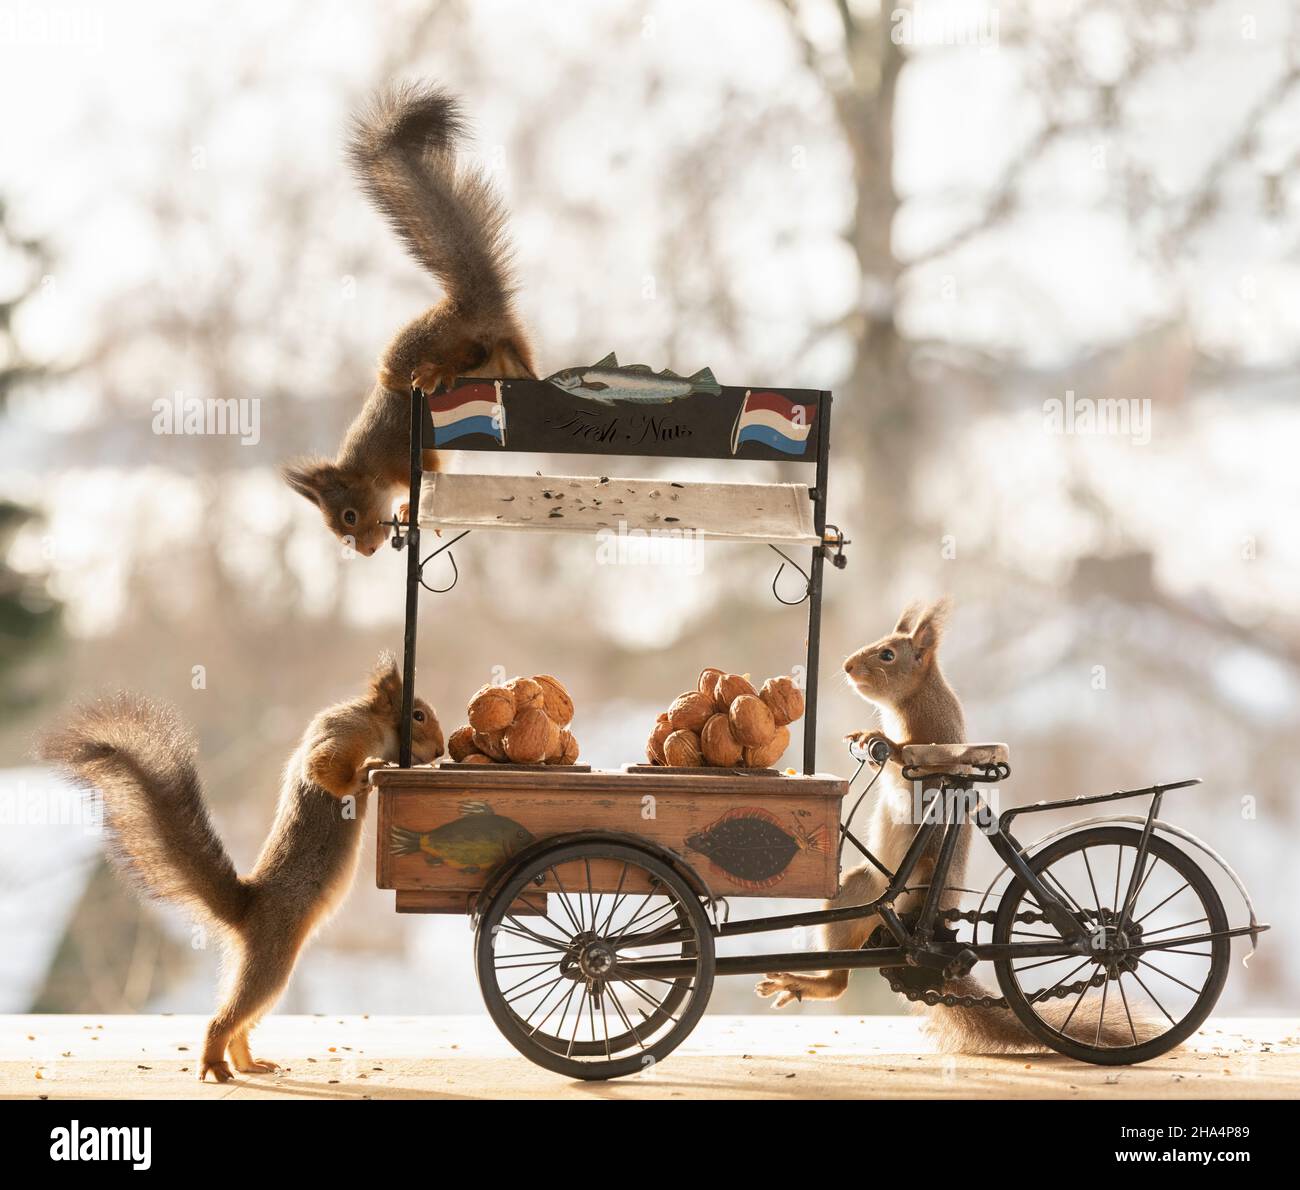 red squirrel sciurus vulgaris,eurasian red squirrel,are standing on a cargo bike with walnuts Stock Photo